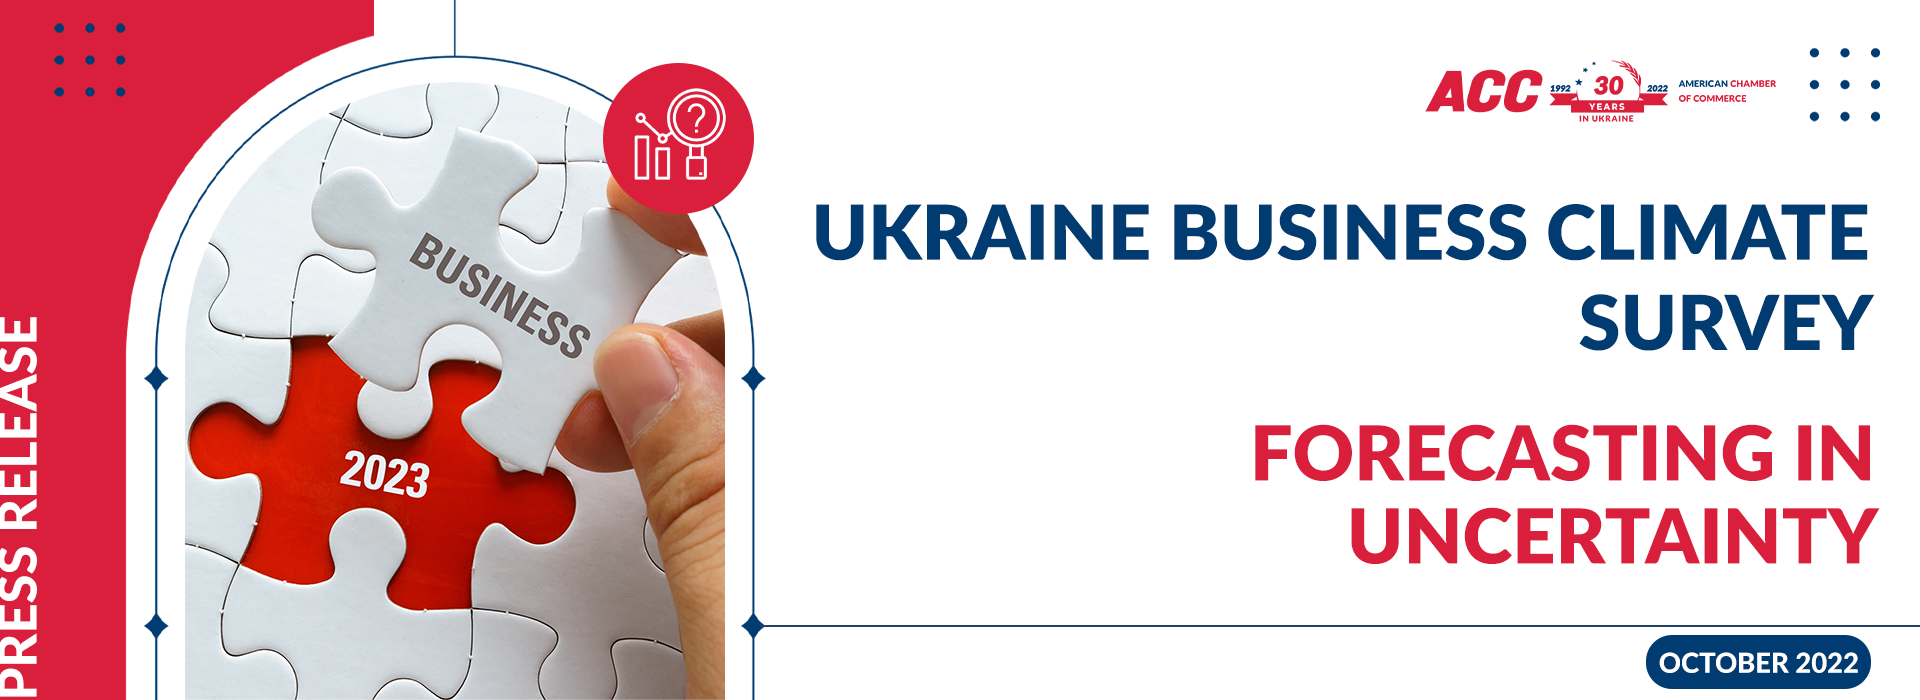 77% of American Chamber of Commerce members believe the war will end in 2023. 92% think Ukraine will win the war. AmCham Ukraine Latest Business Climate Survey